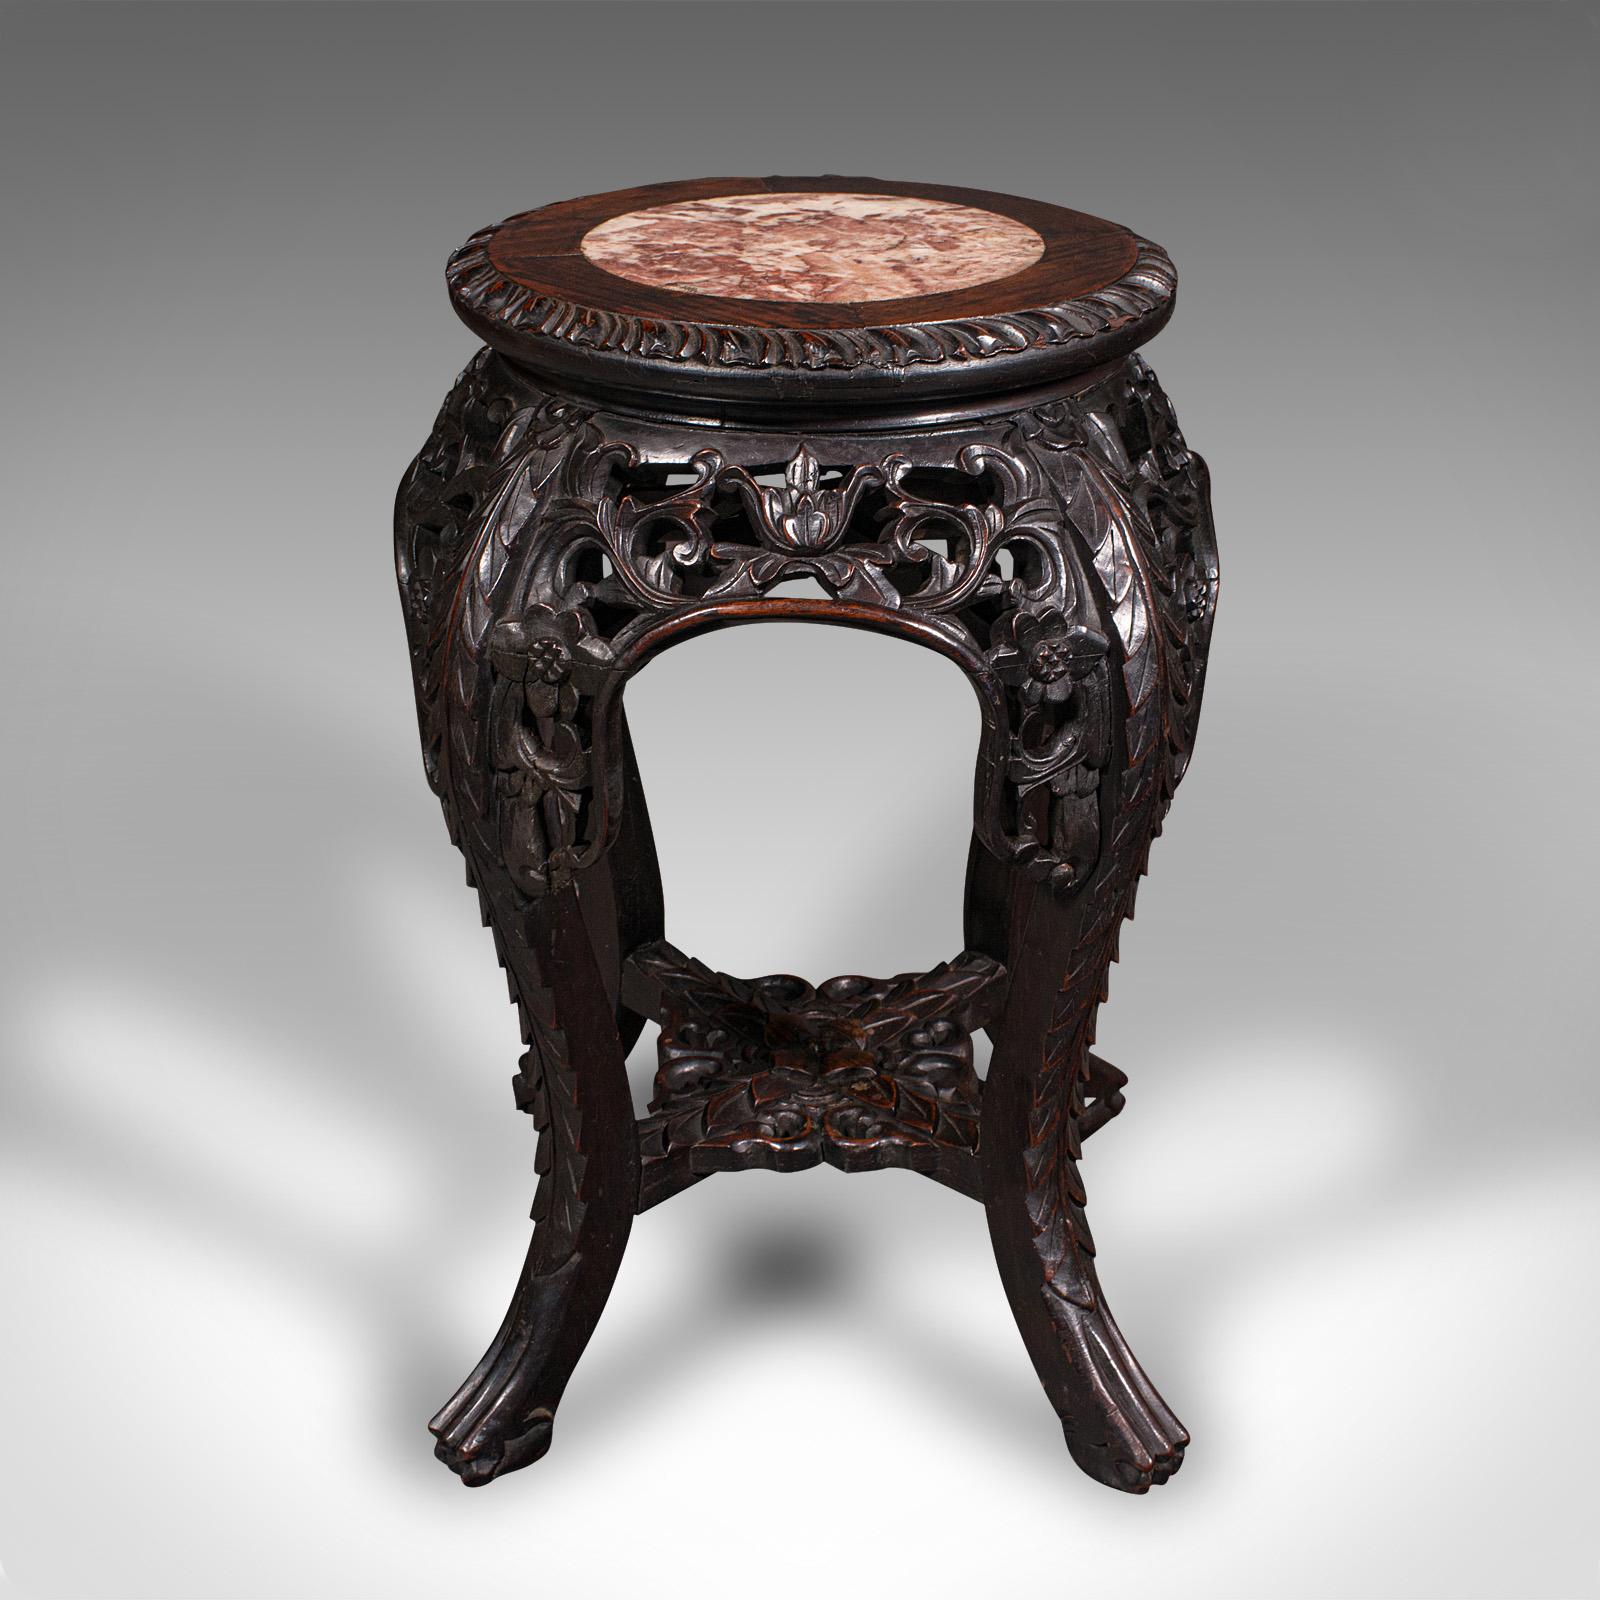 Early 20th Century Antique Planter Stand, Chinese, Jardiniere Stand, Lamp Table, Victorian, C.1900 For Sale